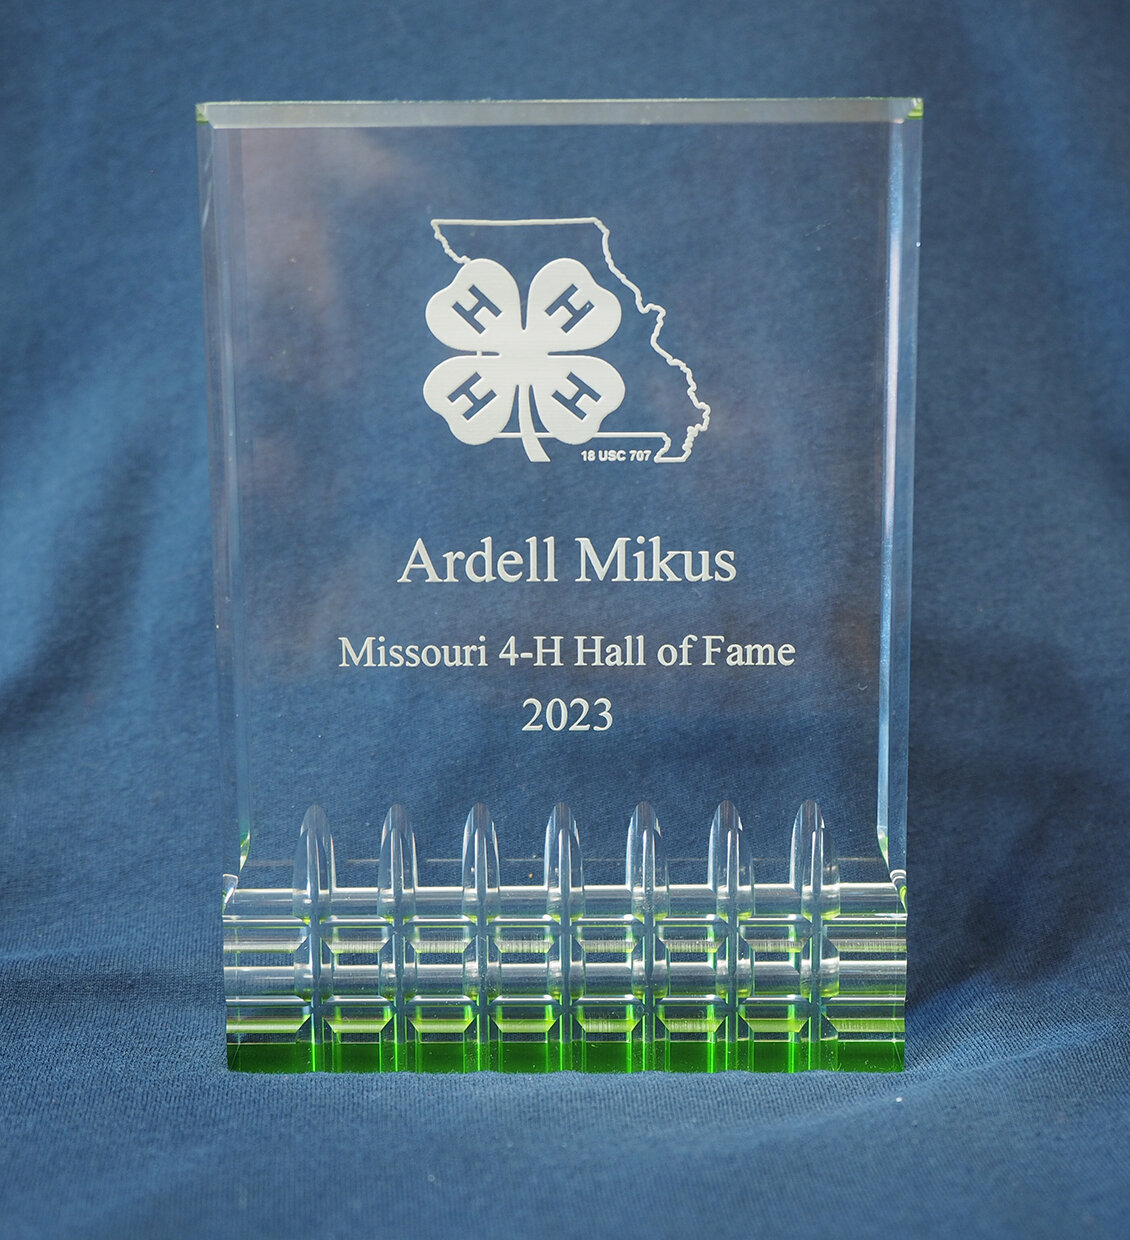 This close up shows the award Ardell Mikus received upon being inducted into the Hall of Fame.